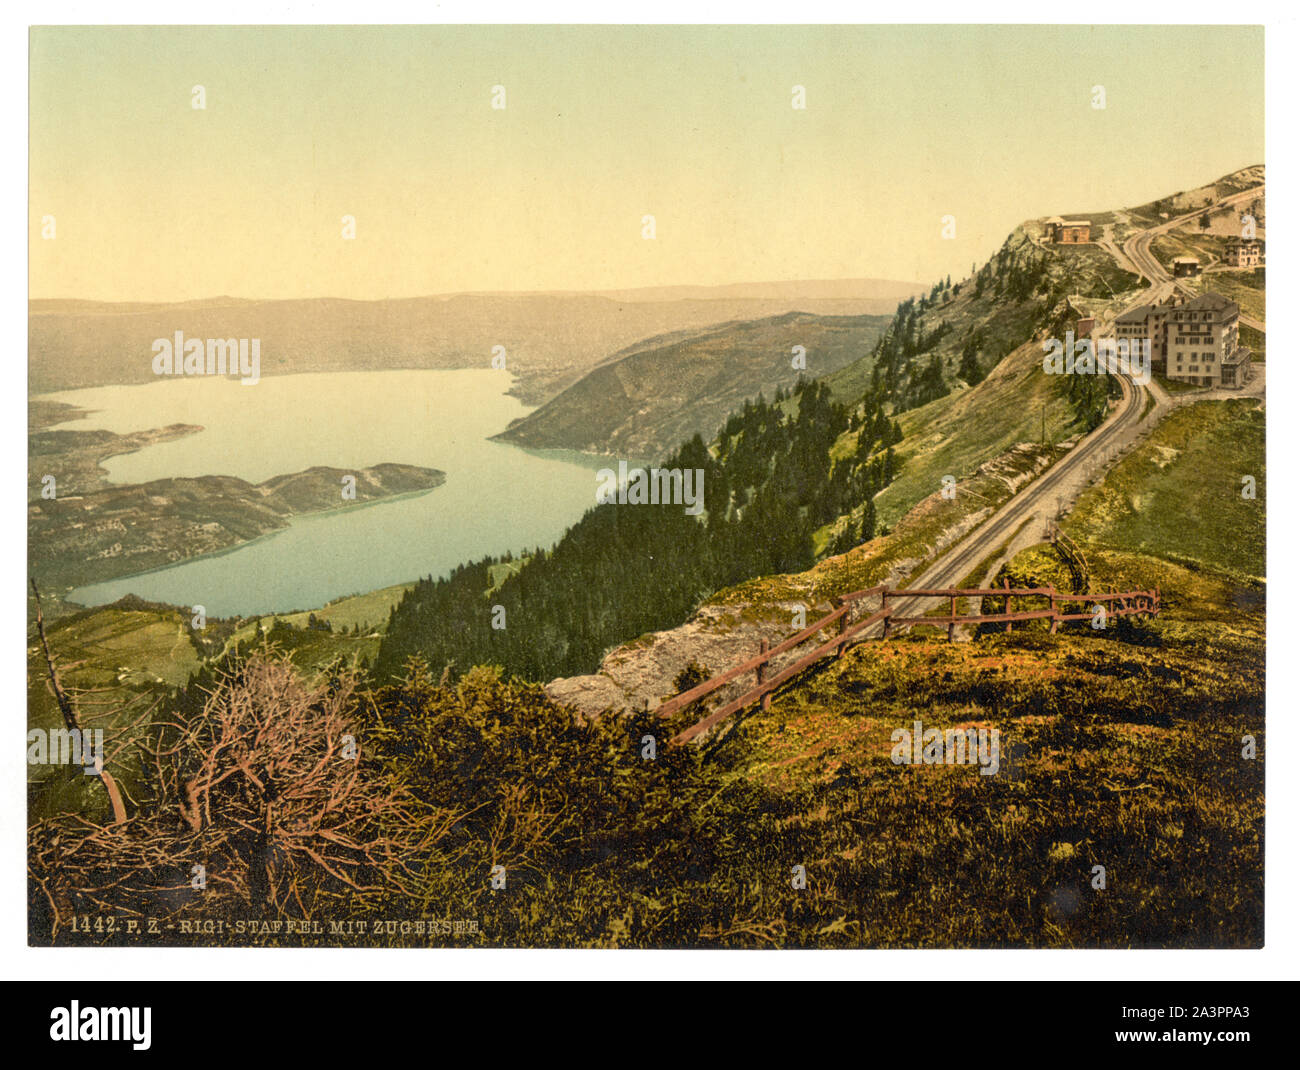 Staffel and Zug Lake, Rigi, Switzerland Forms part of: Views of Switzerland in the Photochrom print collection. Title devised by Library staff. Print no. 1442. Stock Photo